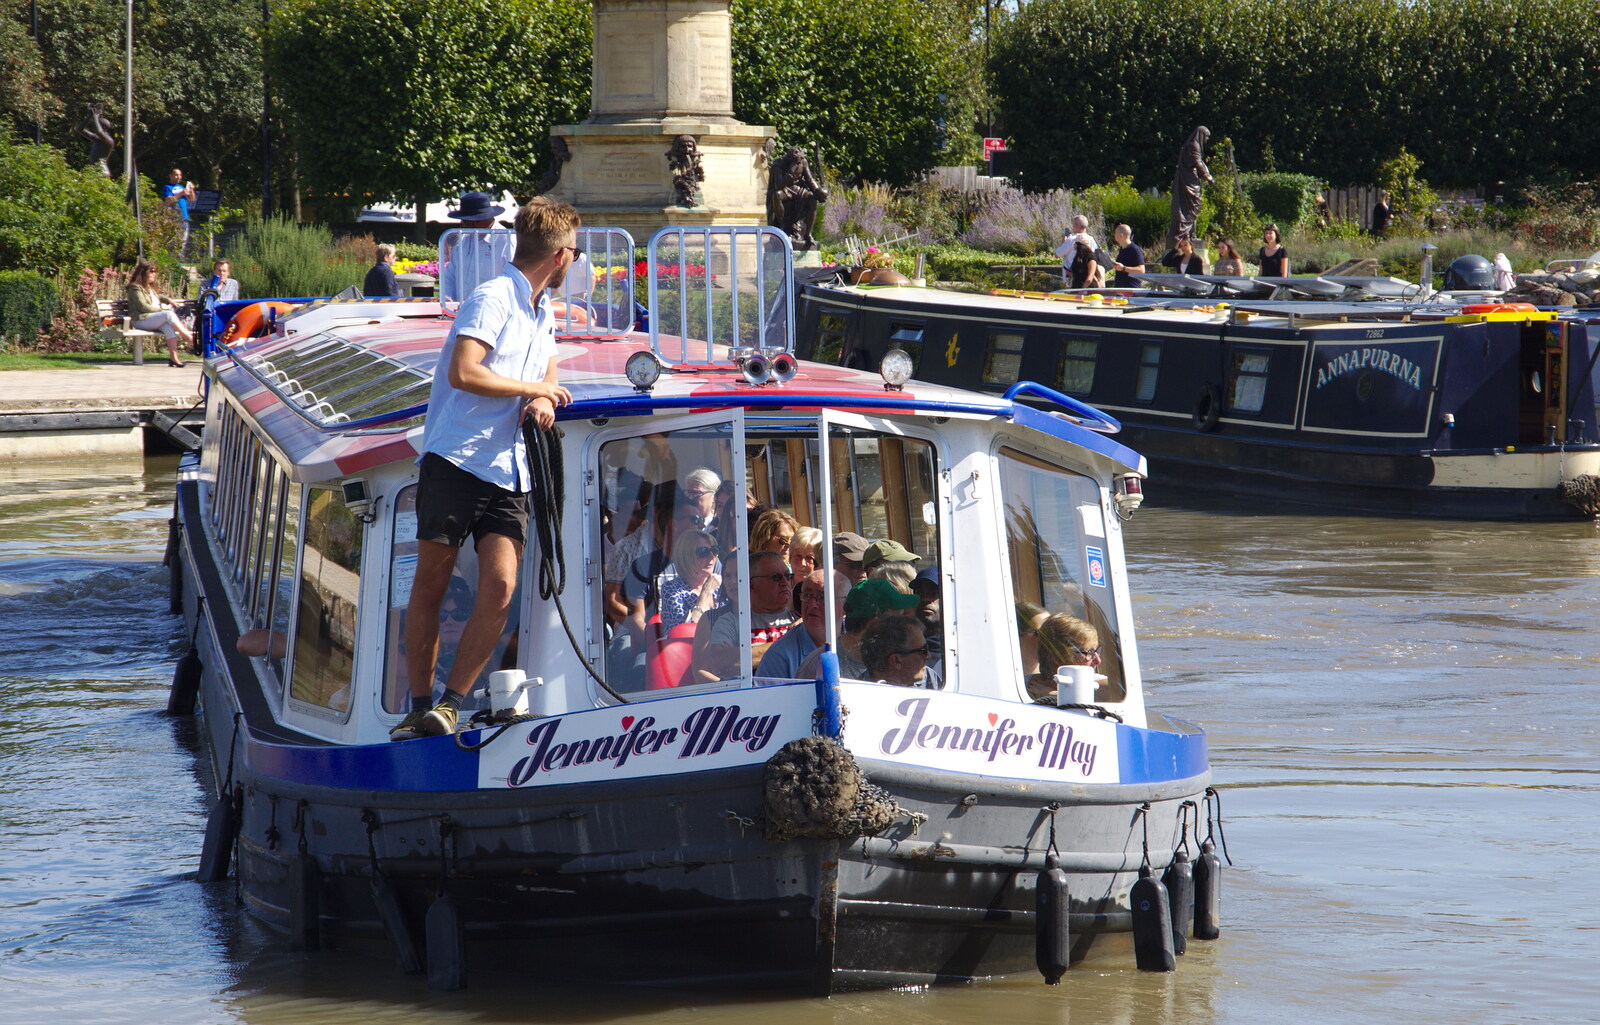 The Jennifer May tour boat from A Boat Trip on the River, Stratford upon Avon, Warwickshire - 14th September 2019